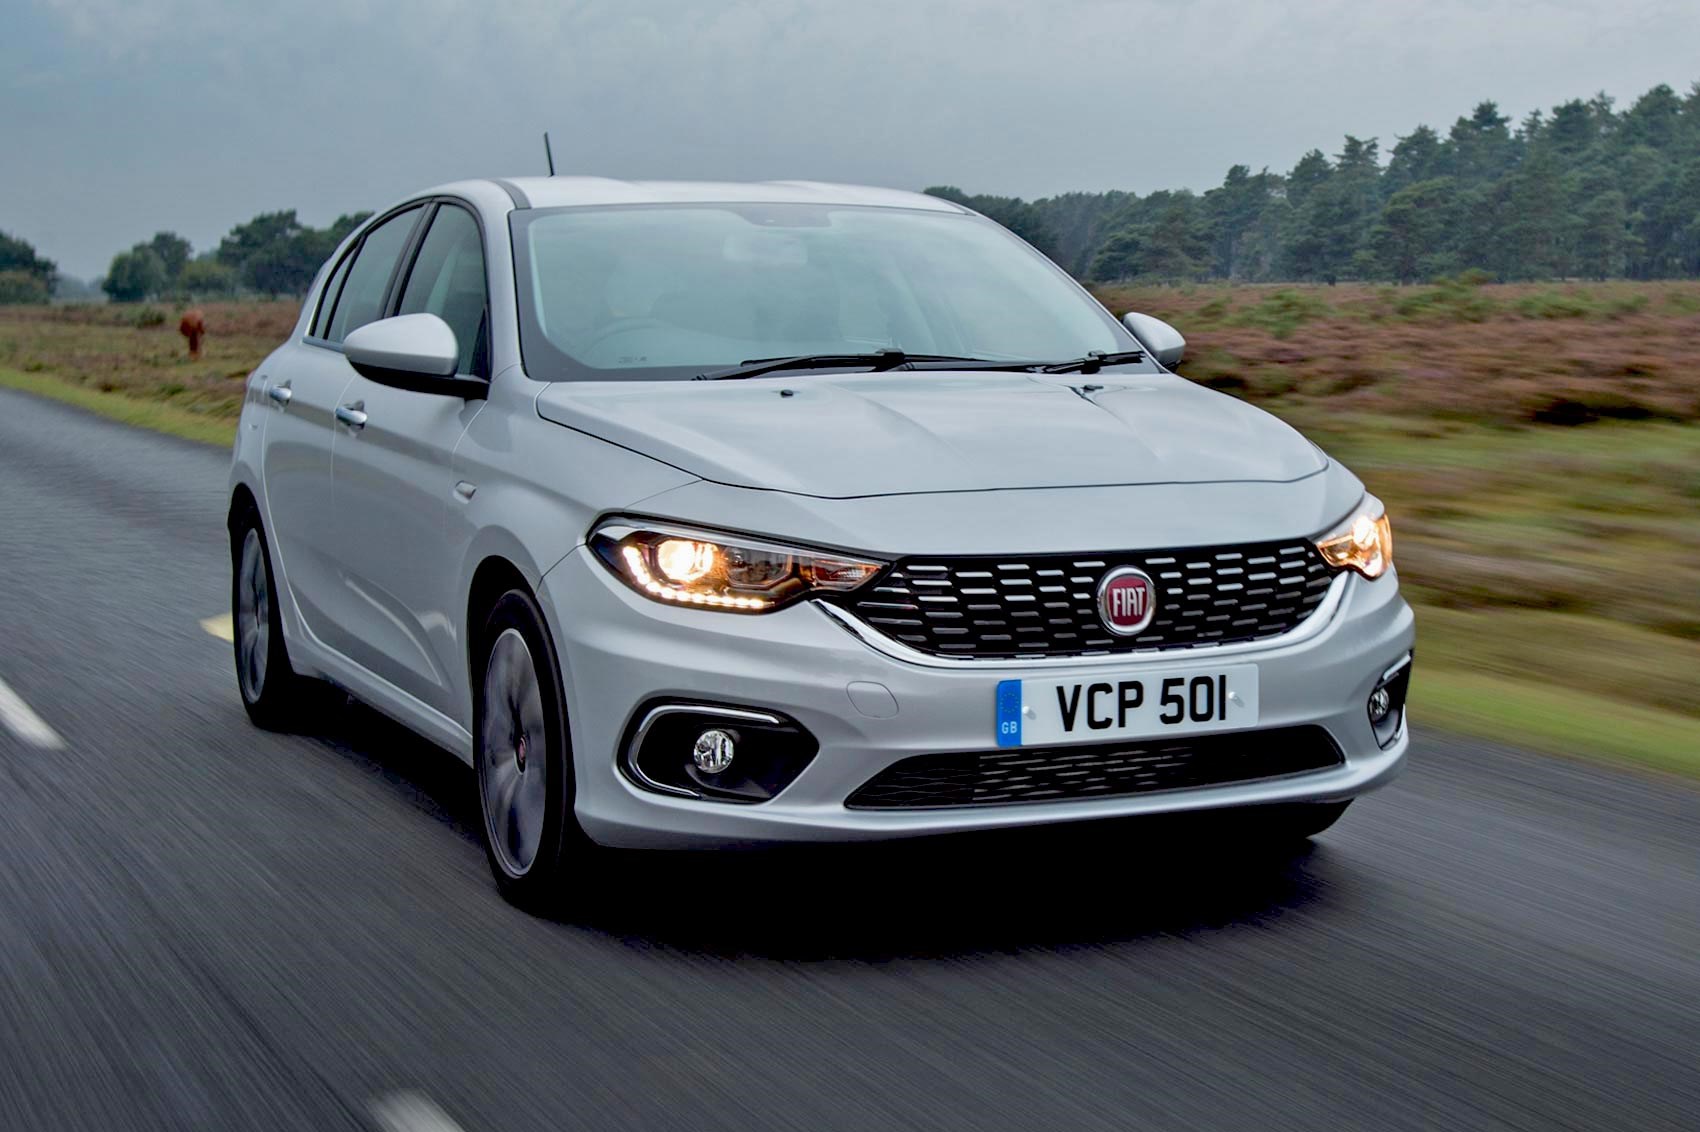 Fiat Tipo 1.6 MultiJet 120 Lounge (2016) review